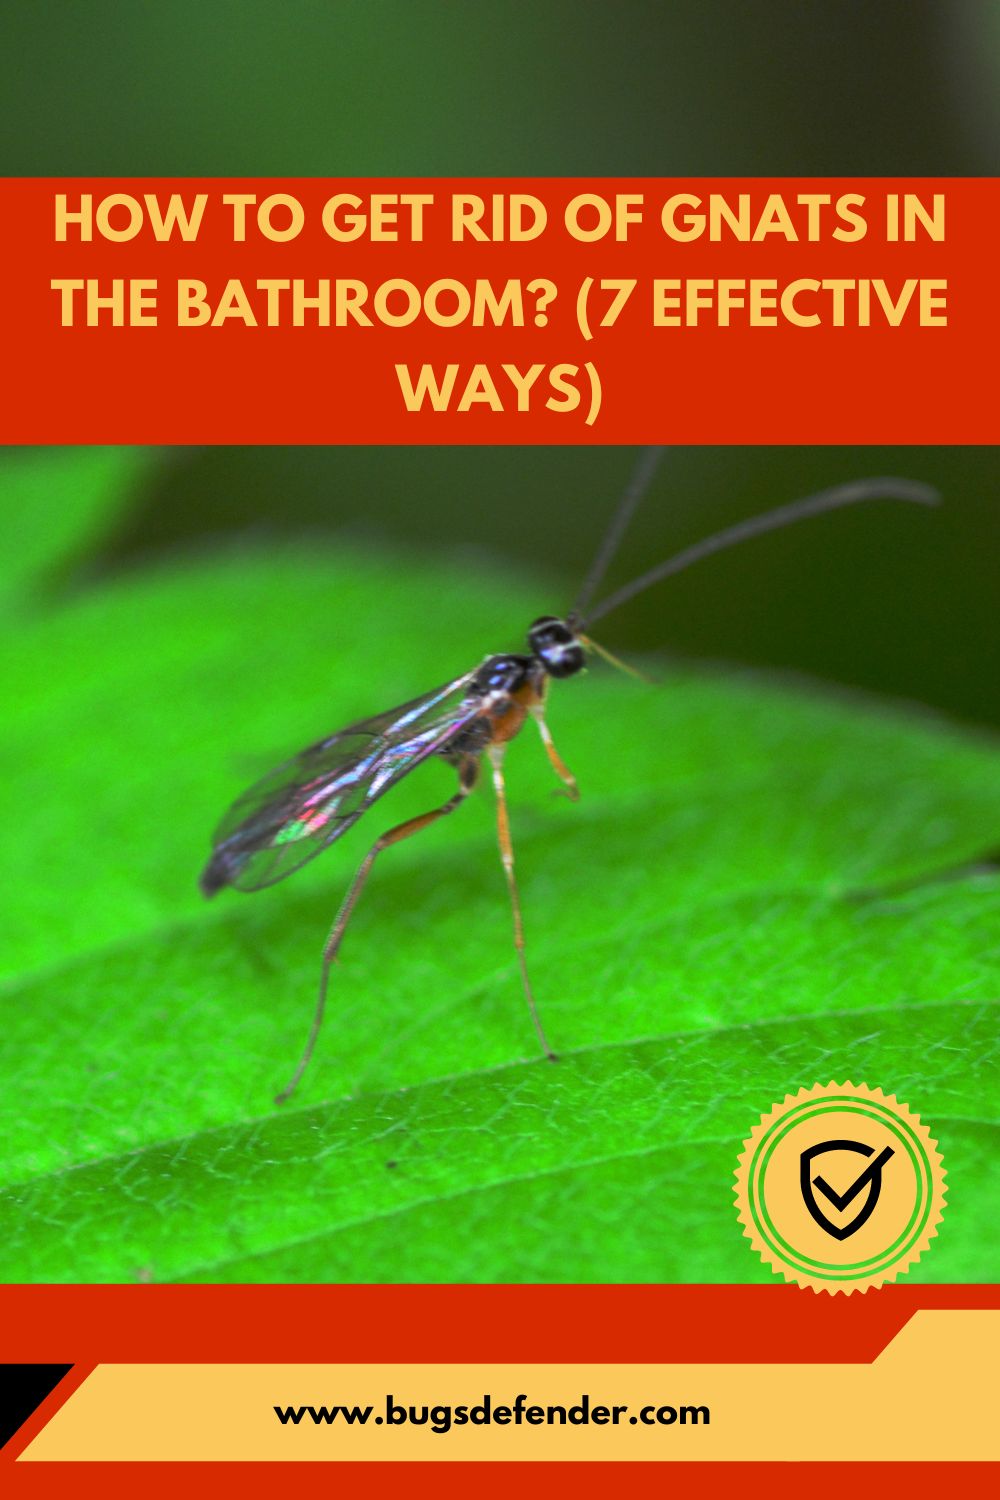 How to Get Rid of Gnats in the Bathroom pin2